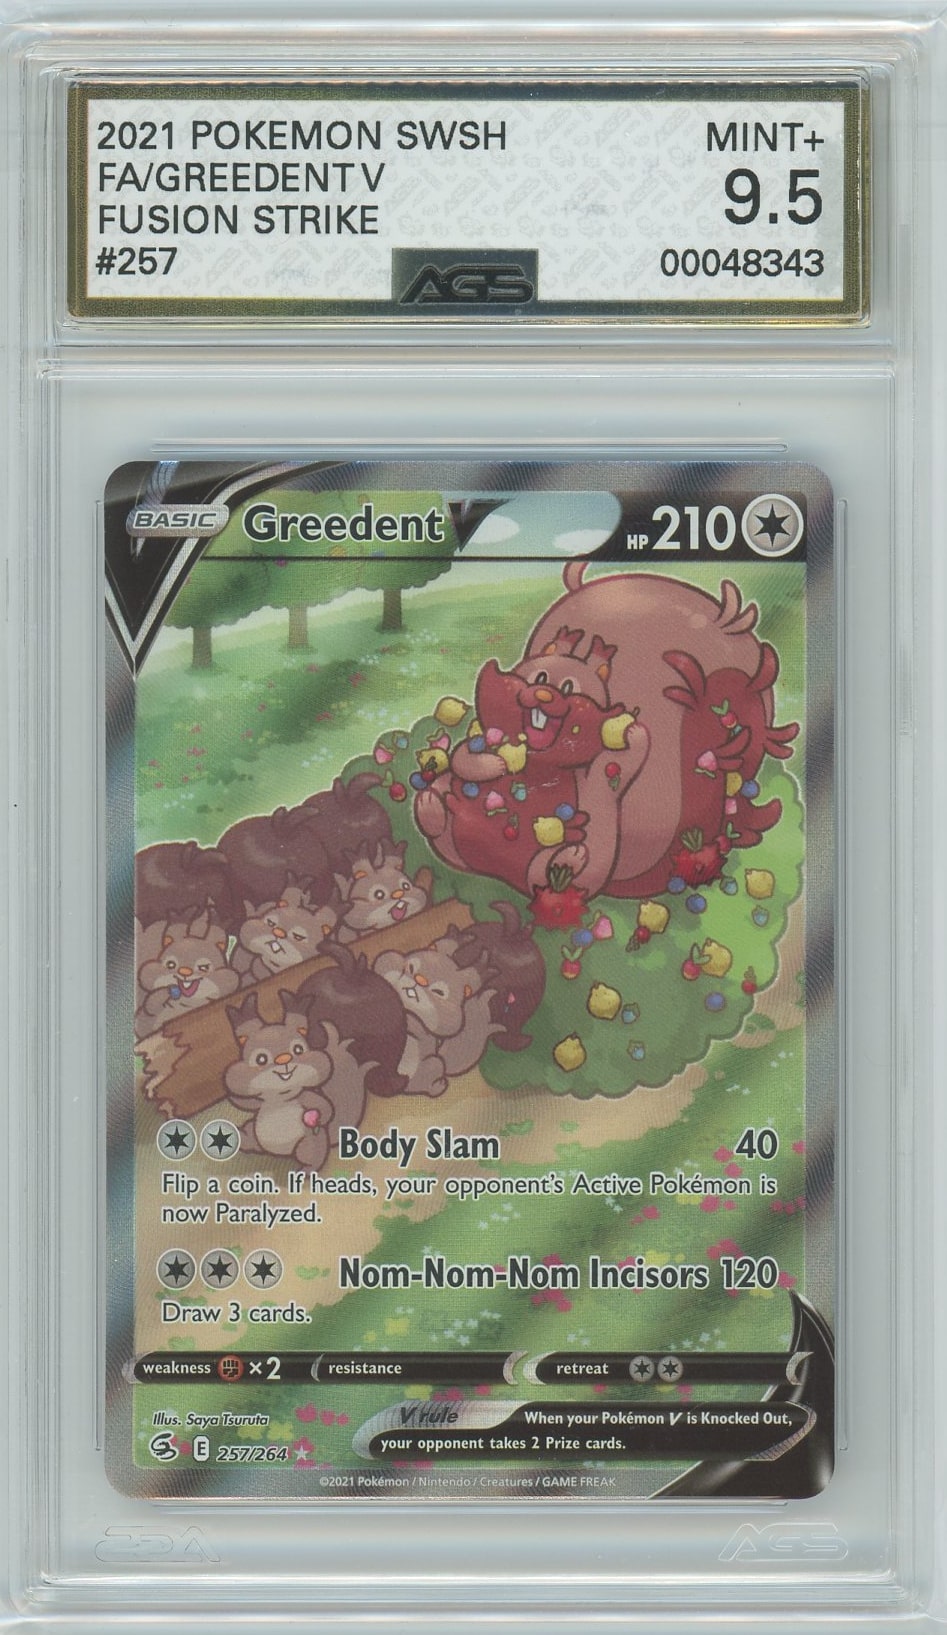 AGS (MINT+ 9.5) Greedent V #257 - Fusion Strike (#00048343)